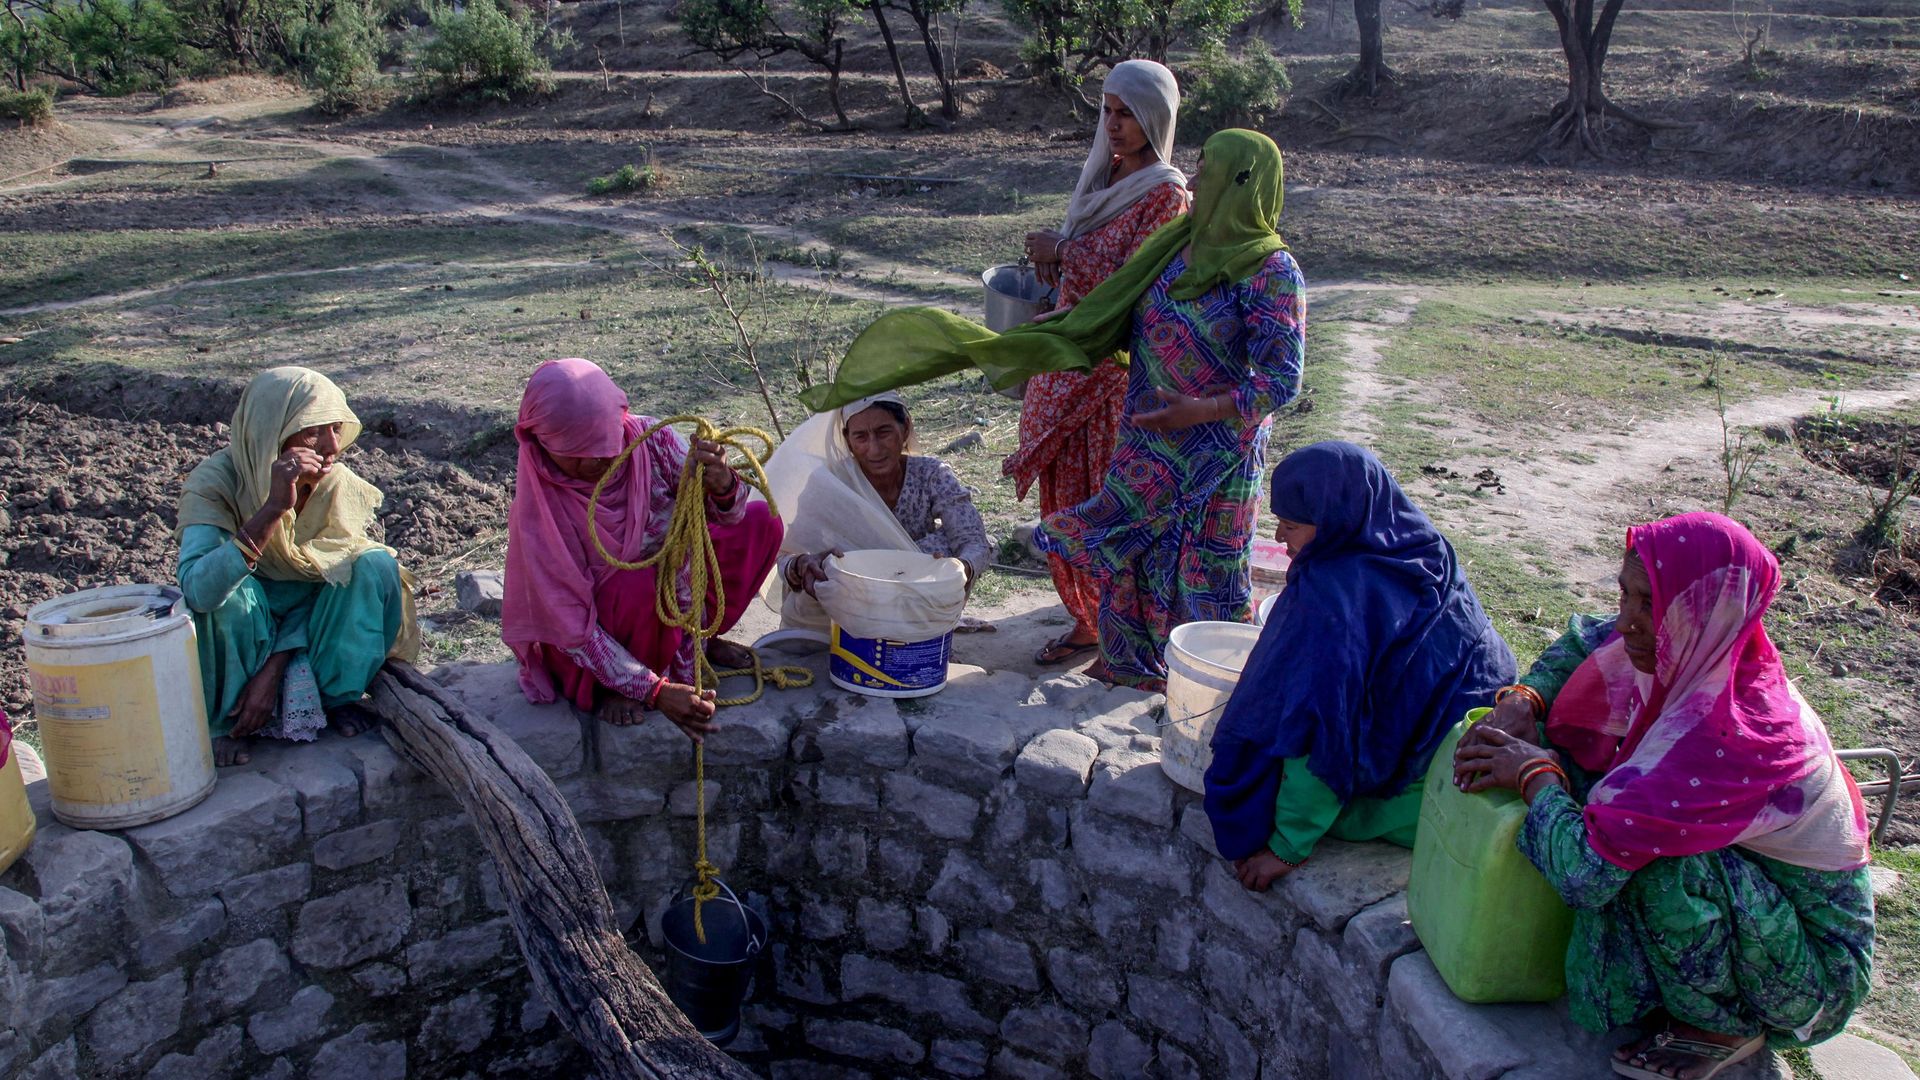 Indian villagers gather near a well running dry to collect drinking water at Padal village of the district of Samba, some 45 km from Jammu, on June 2, 2019.